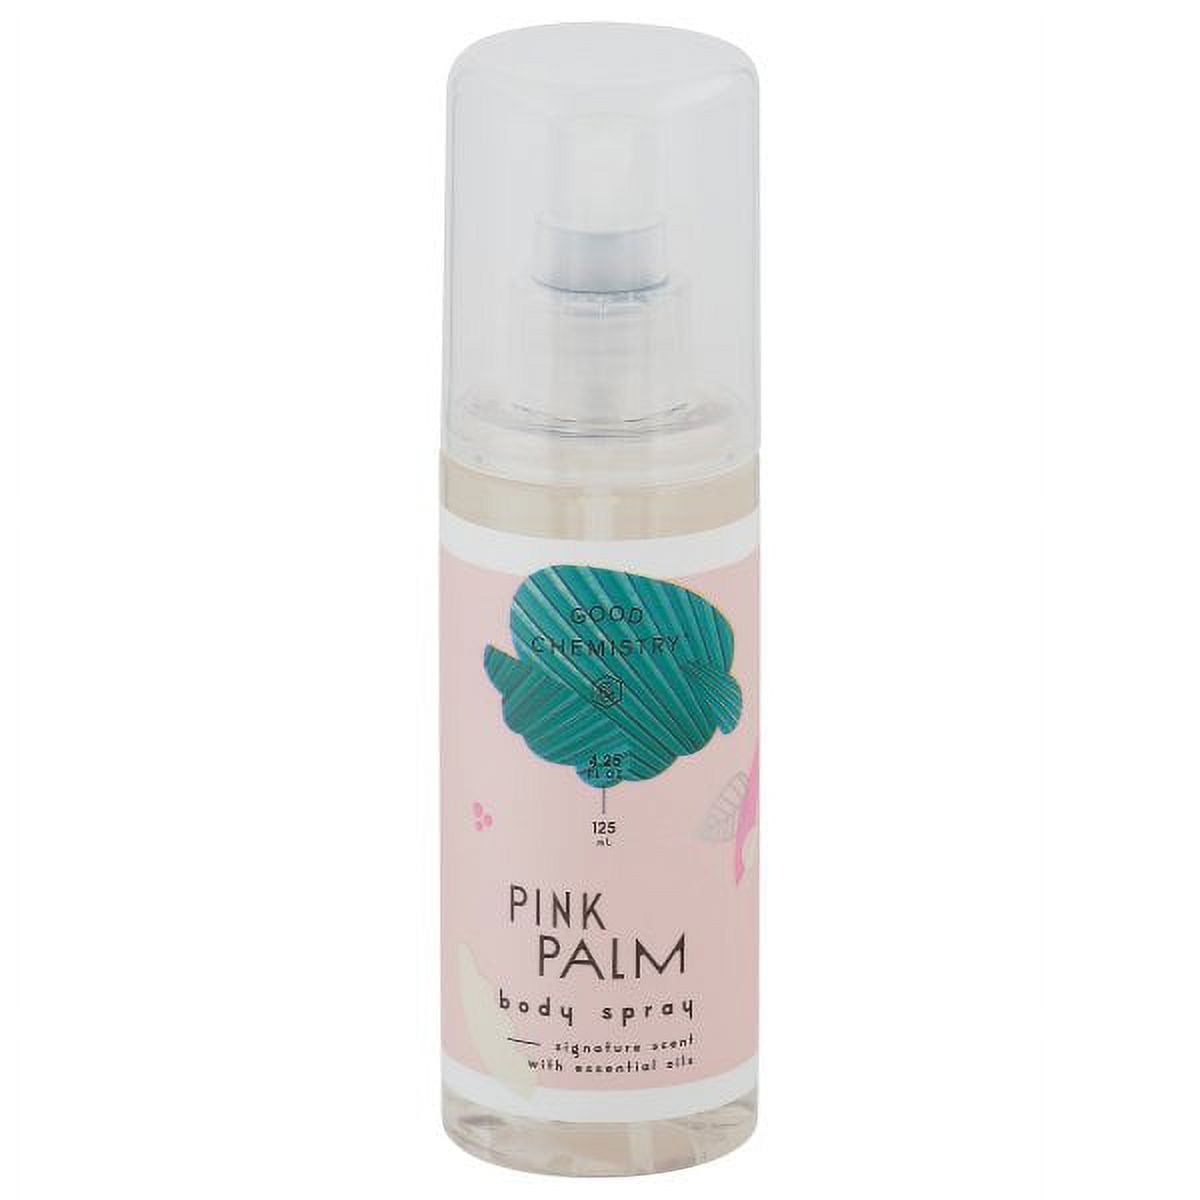 Shop Pink Palm at Good Chemistry